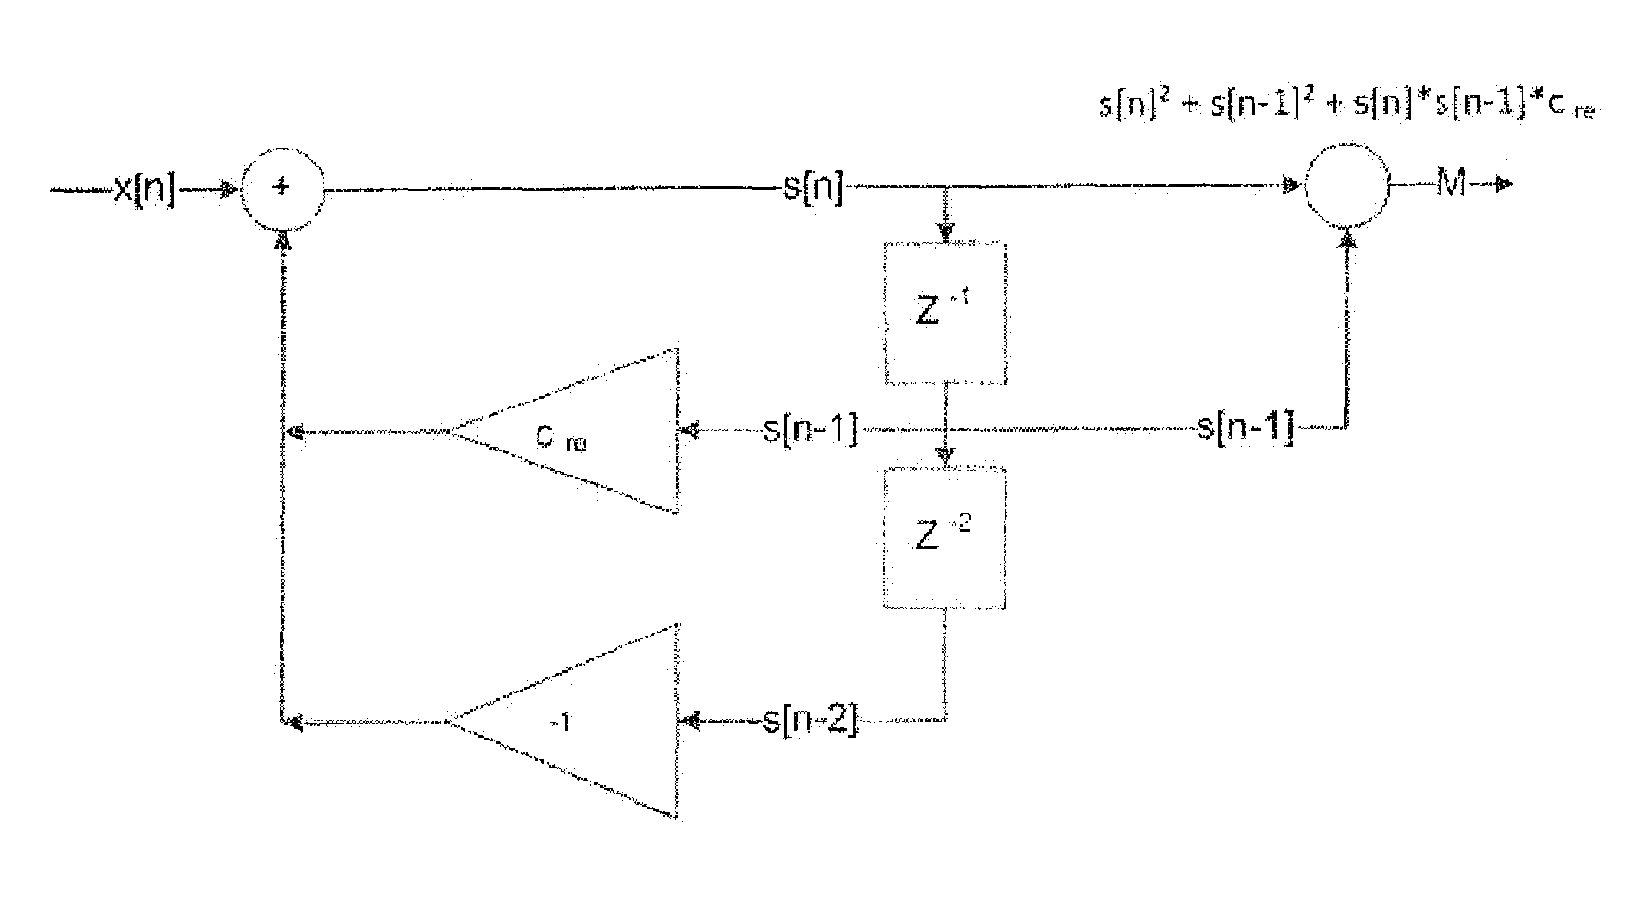 Demodulator for frequency-shift keyed signals by using the Goertzel algorithm